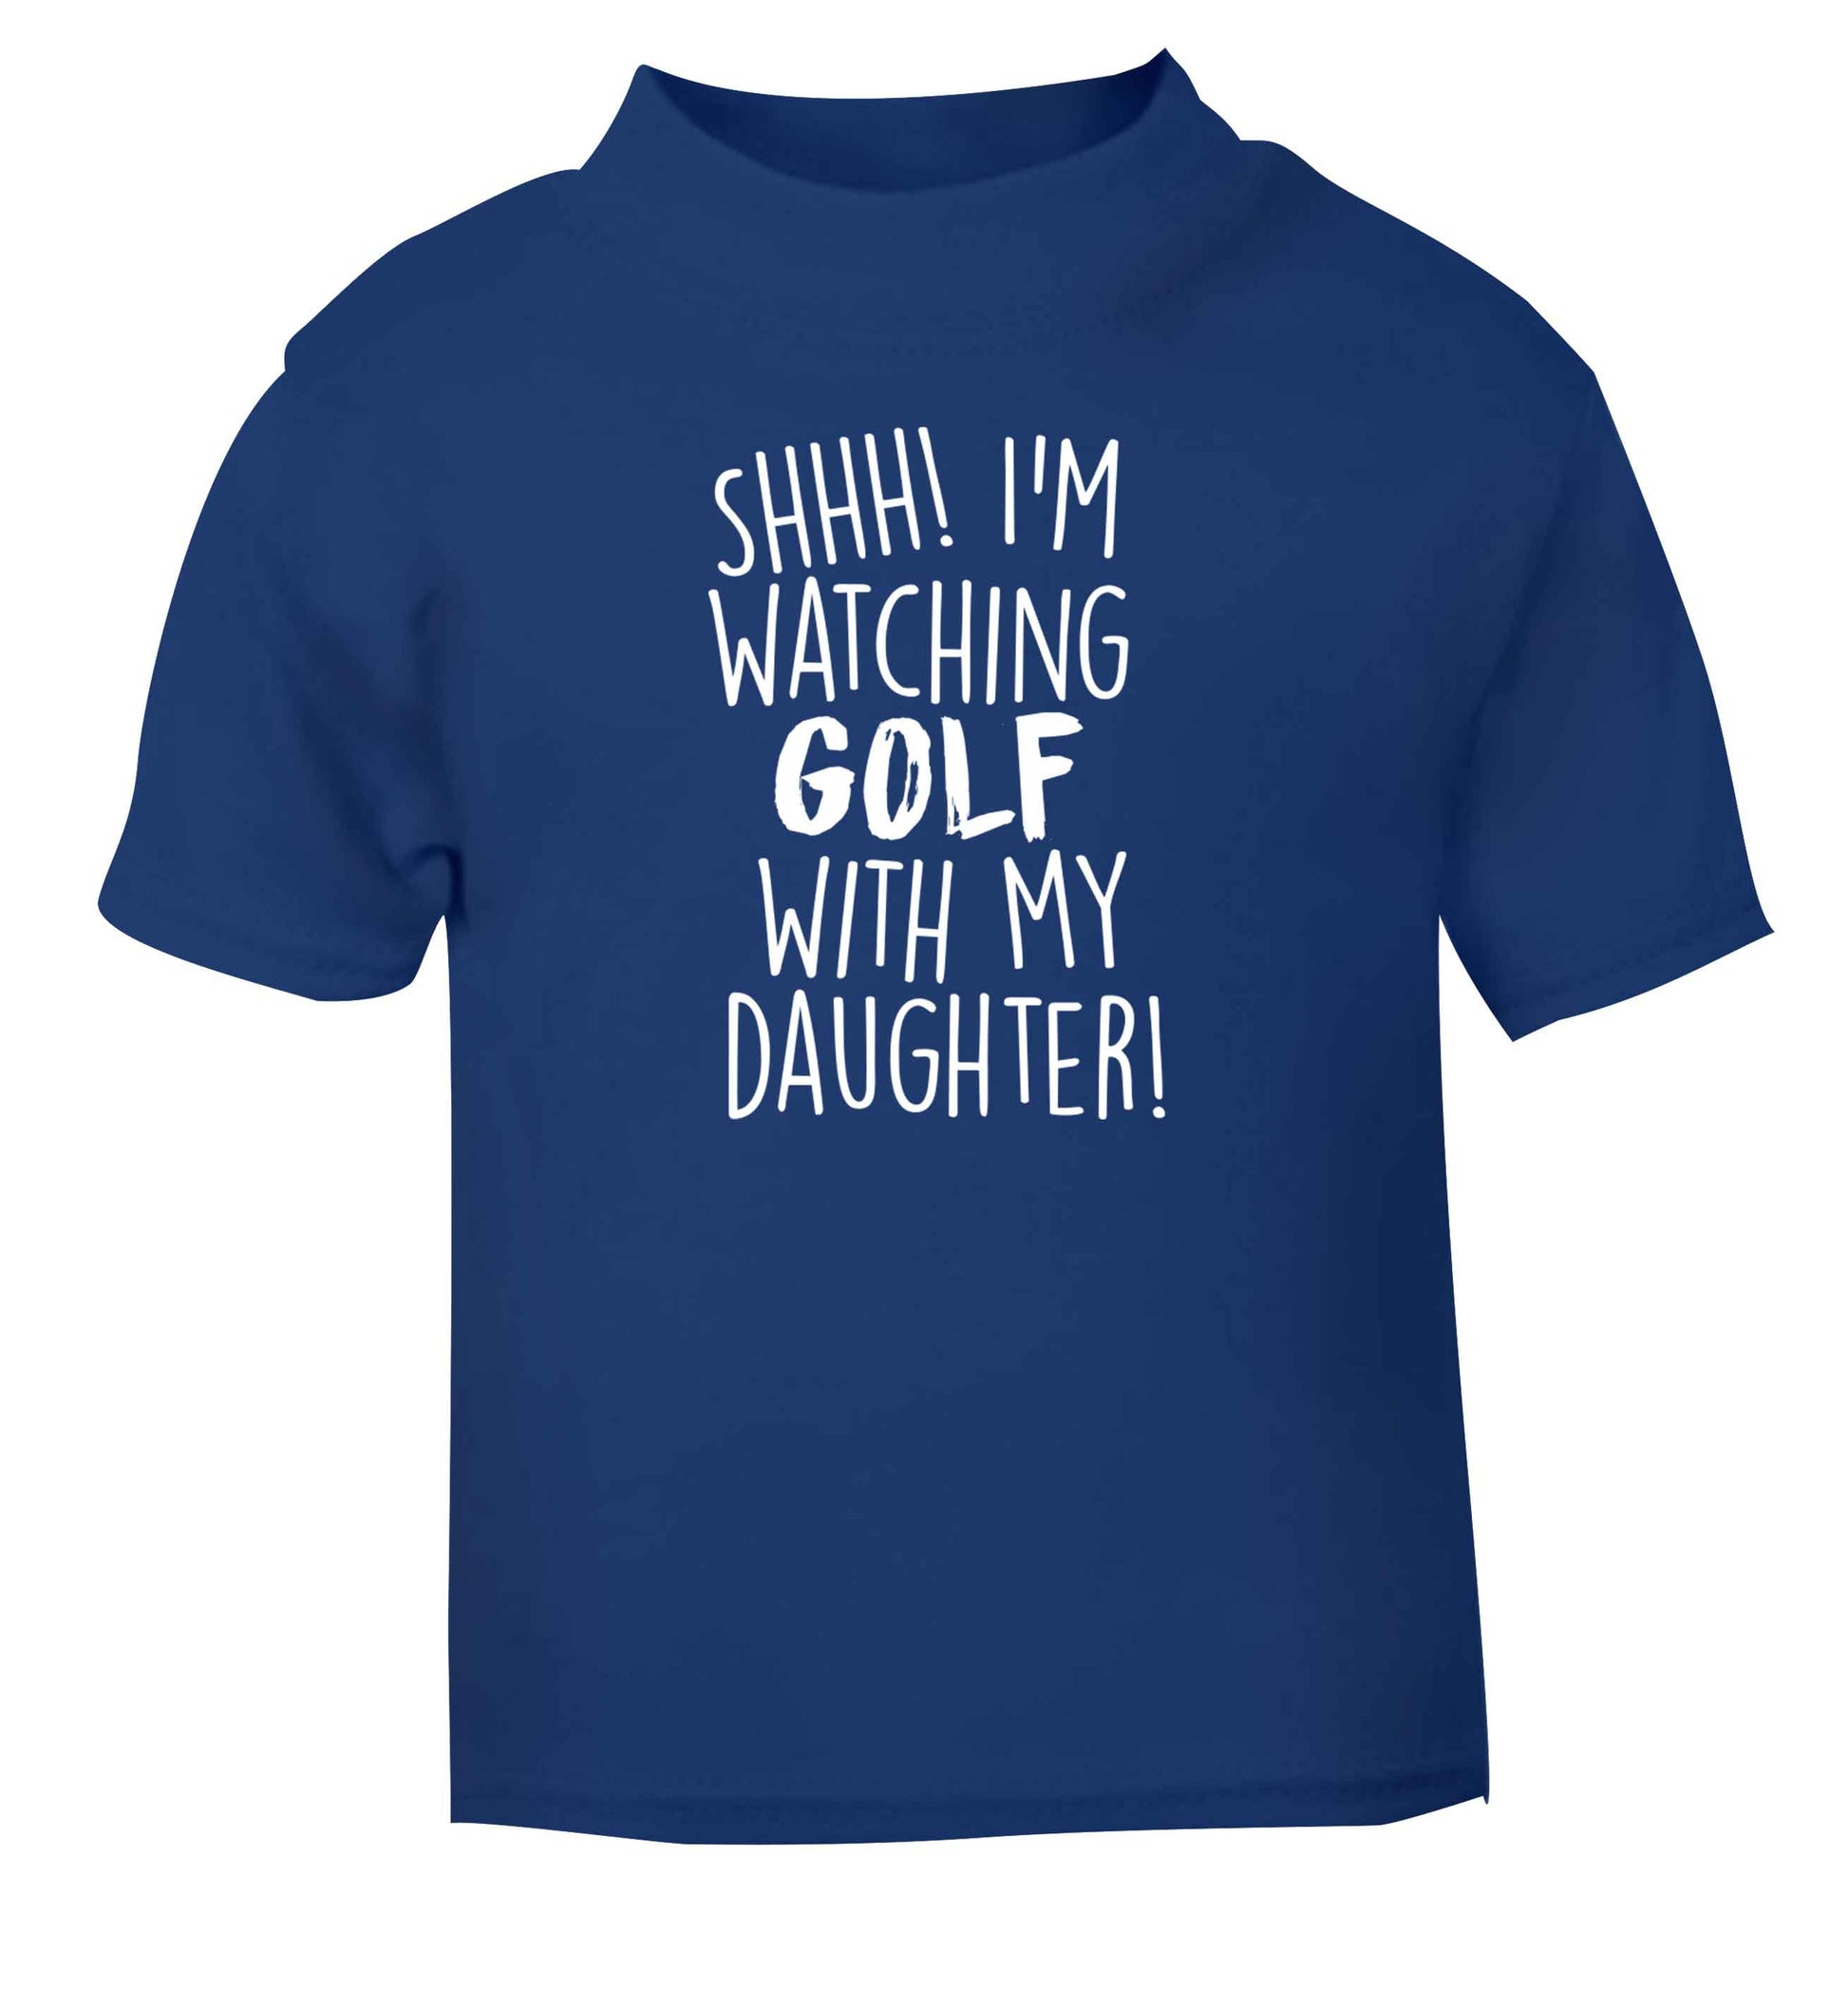 Shh I'm watching golf with my daughter blue Baby Toddler Tshirt 2 Years